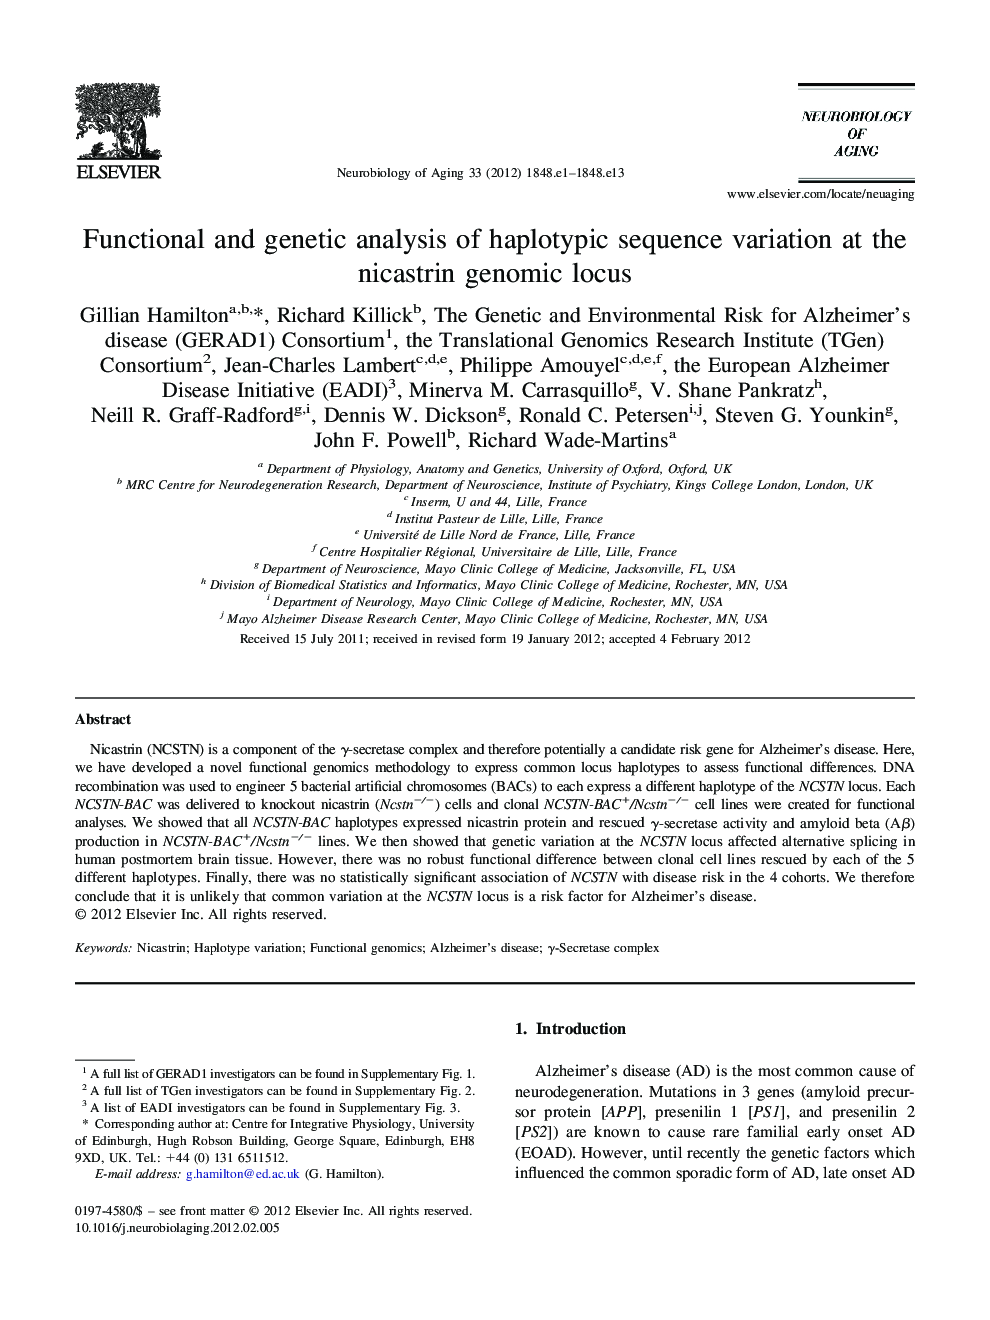 Functional and genetic analysis of haplotypic sequence variation at the nicastrin genomic locus